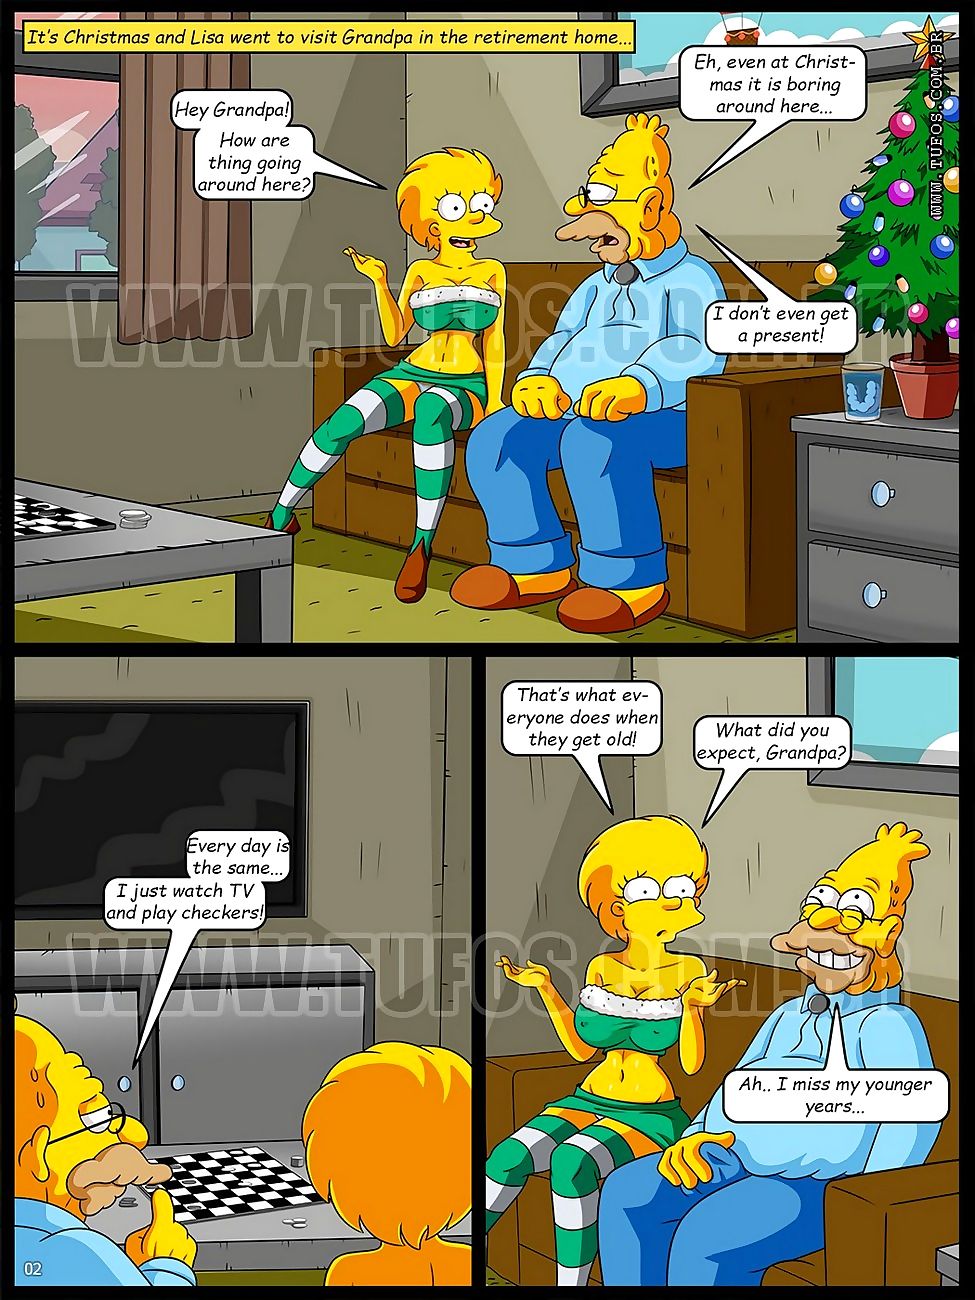 The Simpsons 10 - Christmas At The RetirÃ¢â‚¬Â¦ page 1